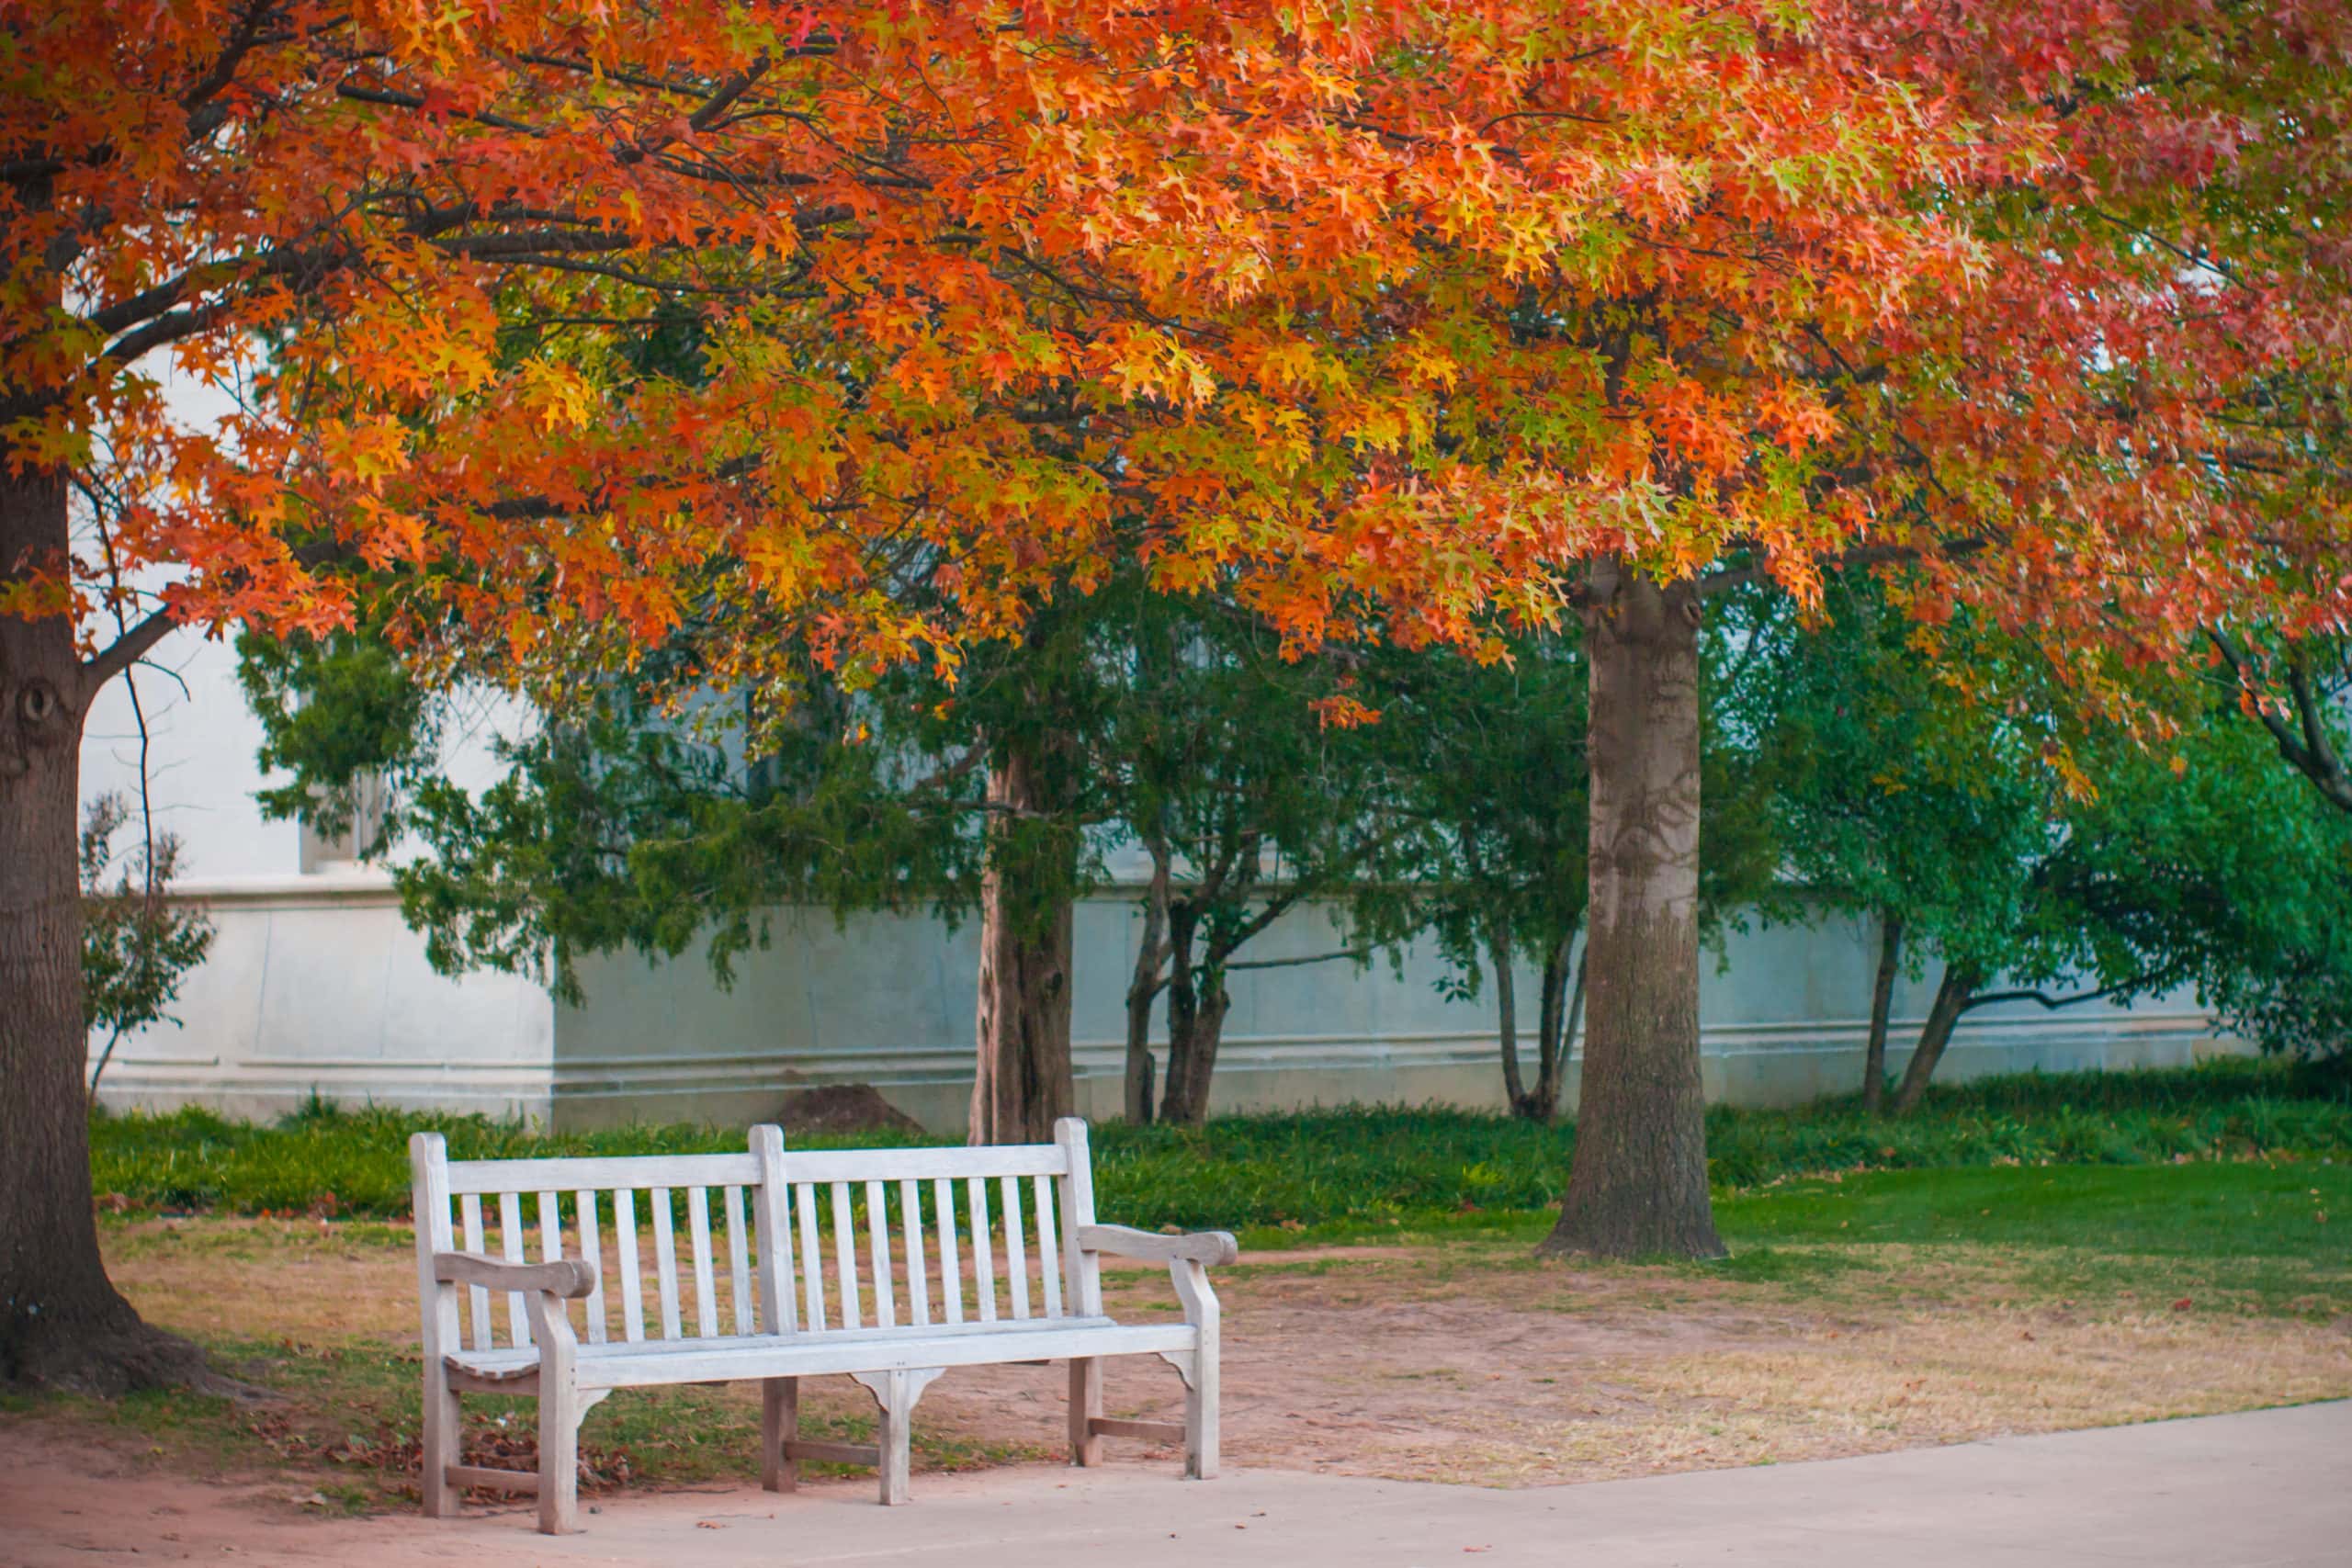 Wooden chair under yellow leaves of fall foliage in Norman, Oklahoma